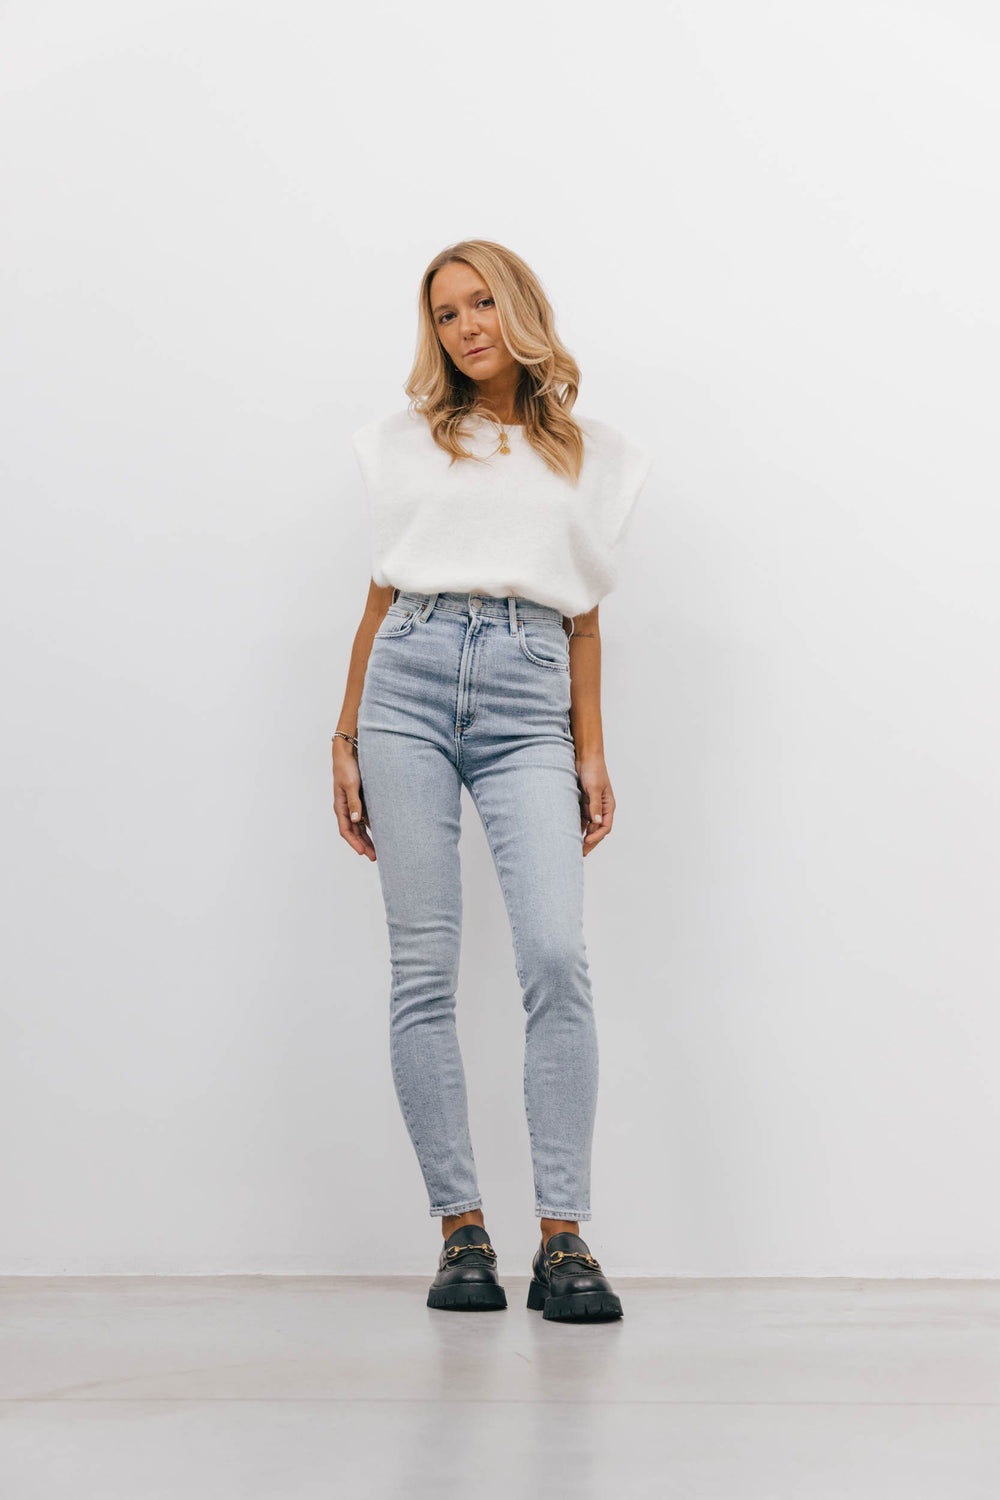 PINCH WAIST ULTRA HIGH RISE SKINNY IN DEBUT Jeans AGOLDE 